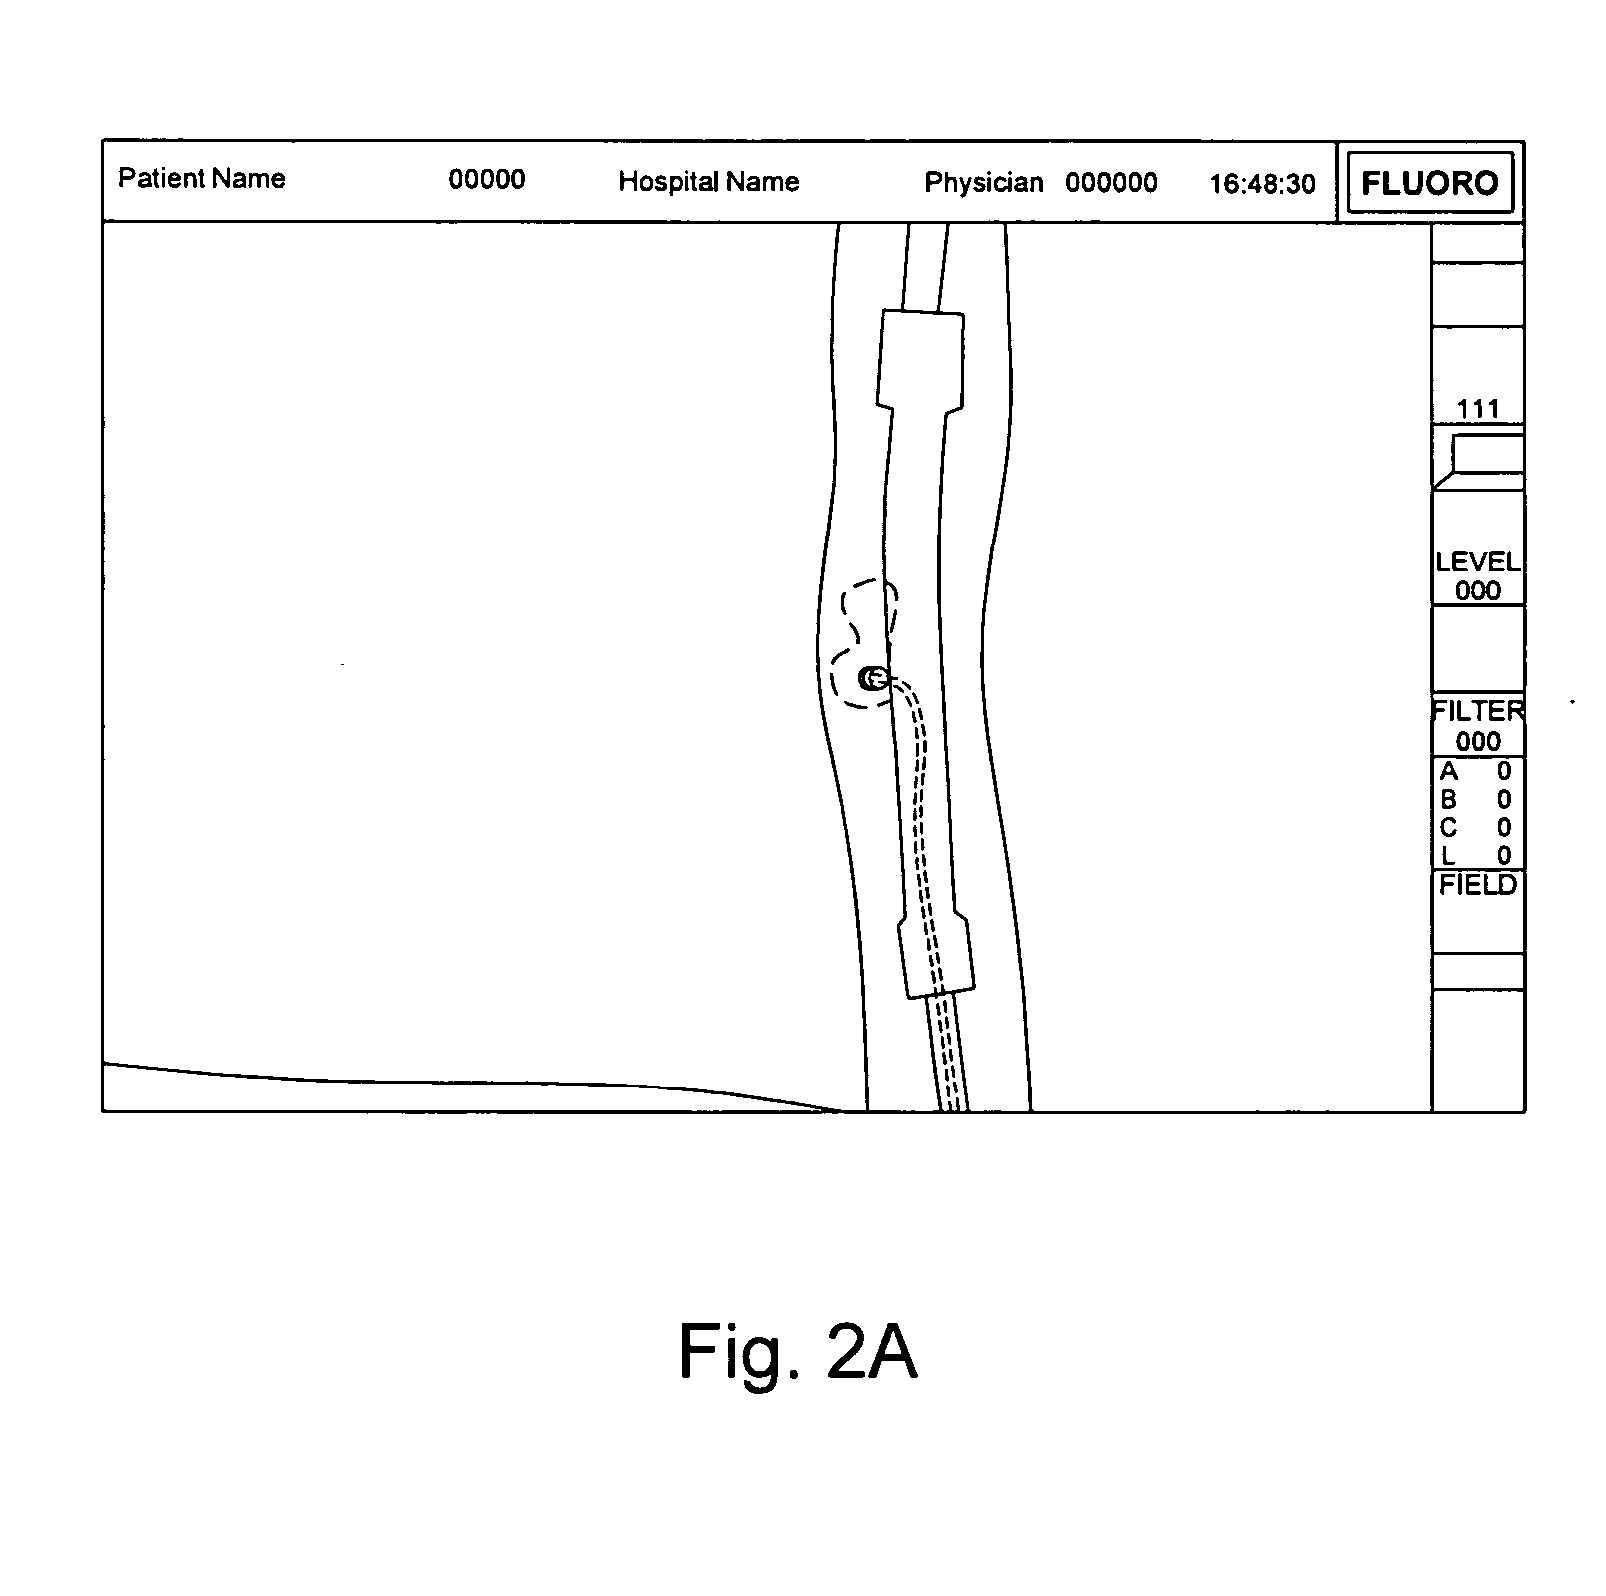 Method of Navigating Medical Devices in the Presence of Radiopaque Material